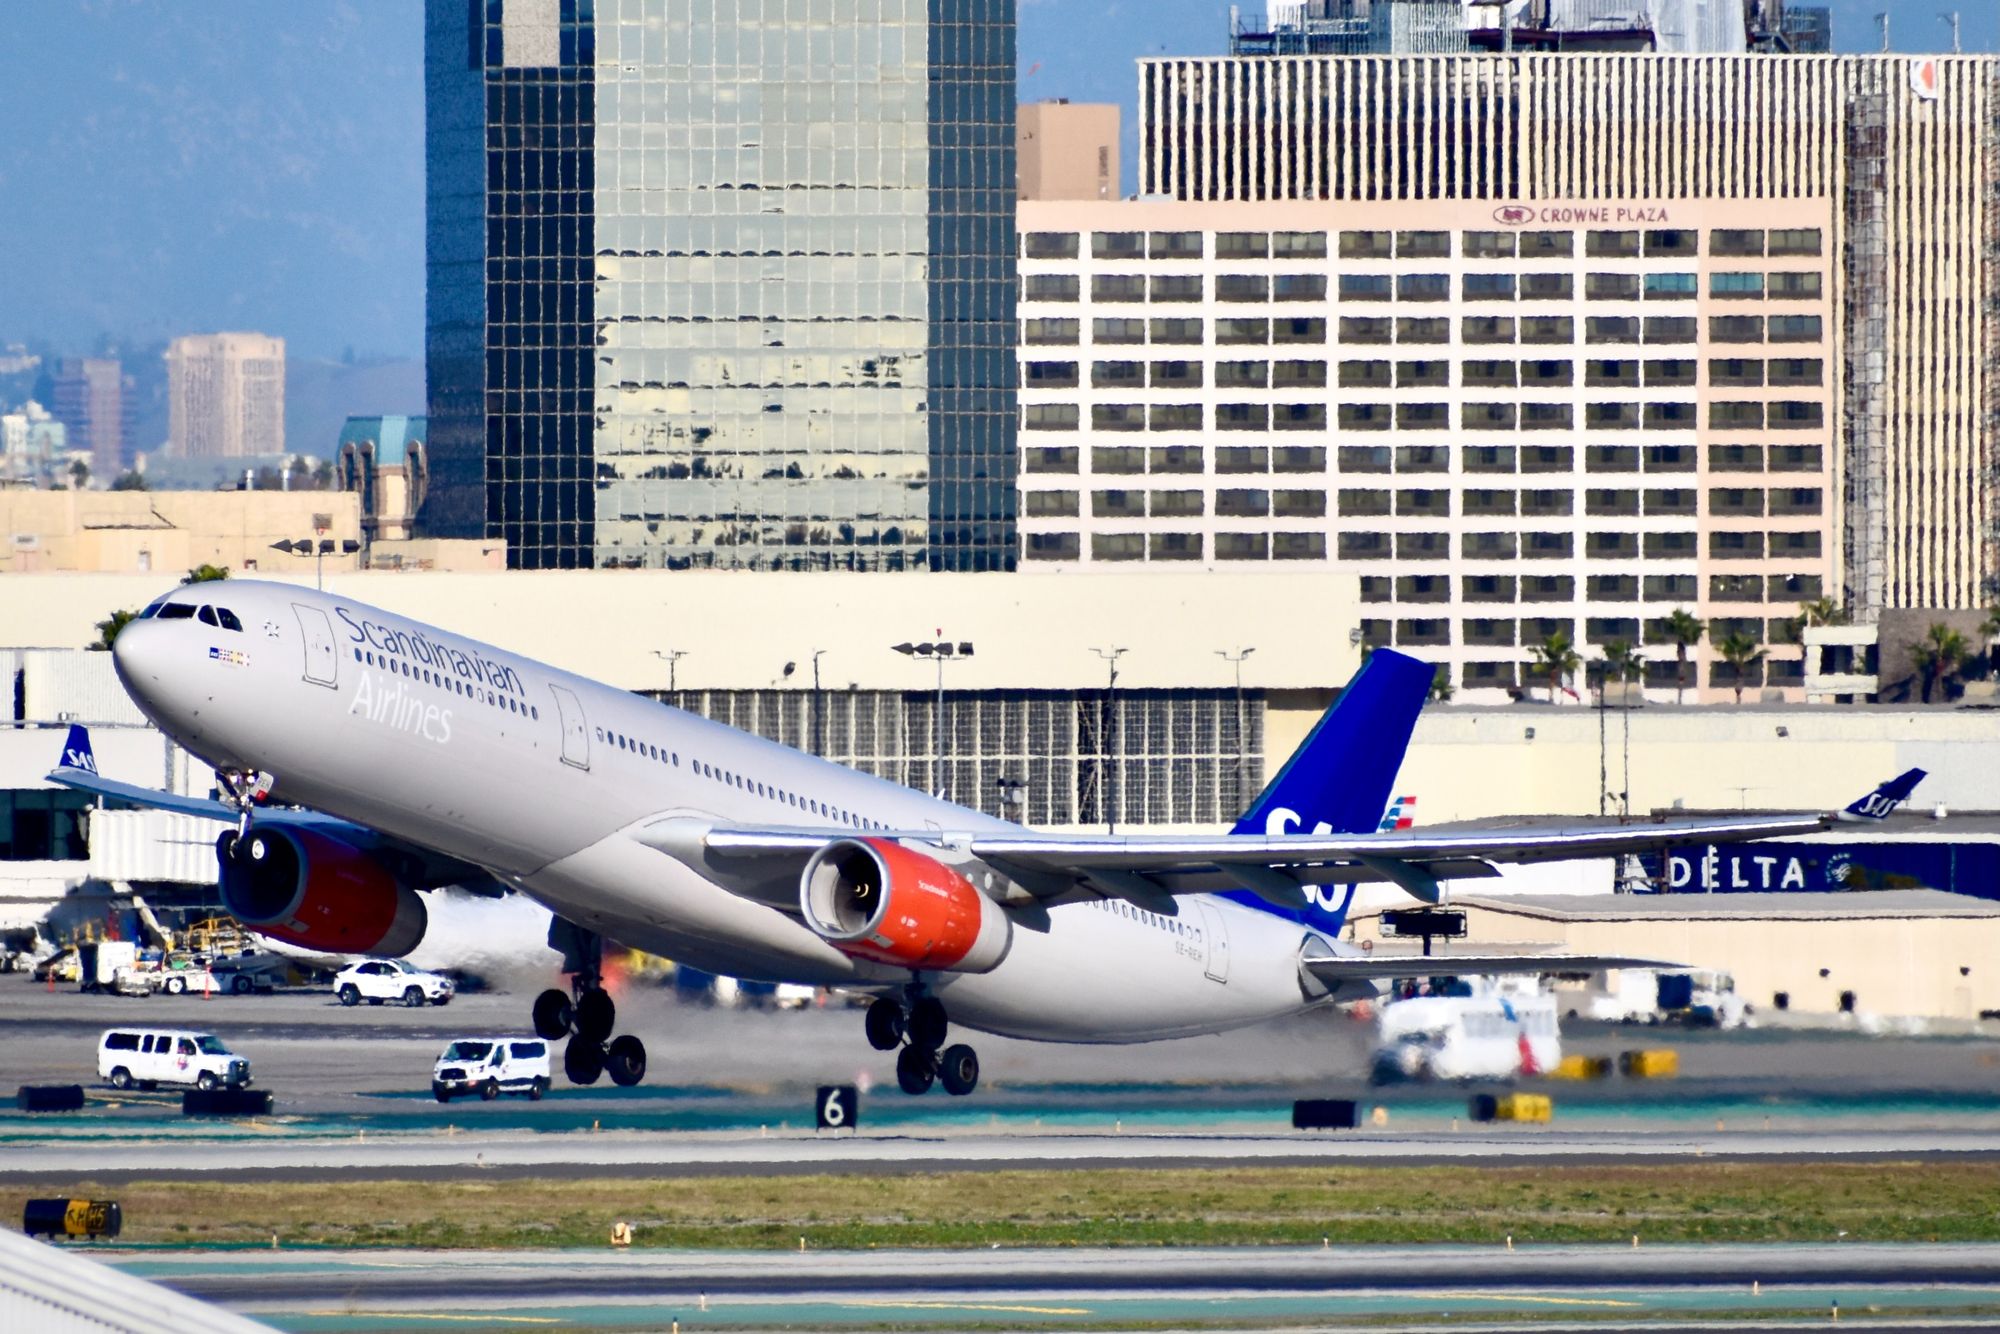 SAS To Leave Star Alliance and Join SkyTeam